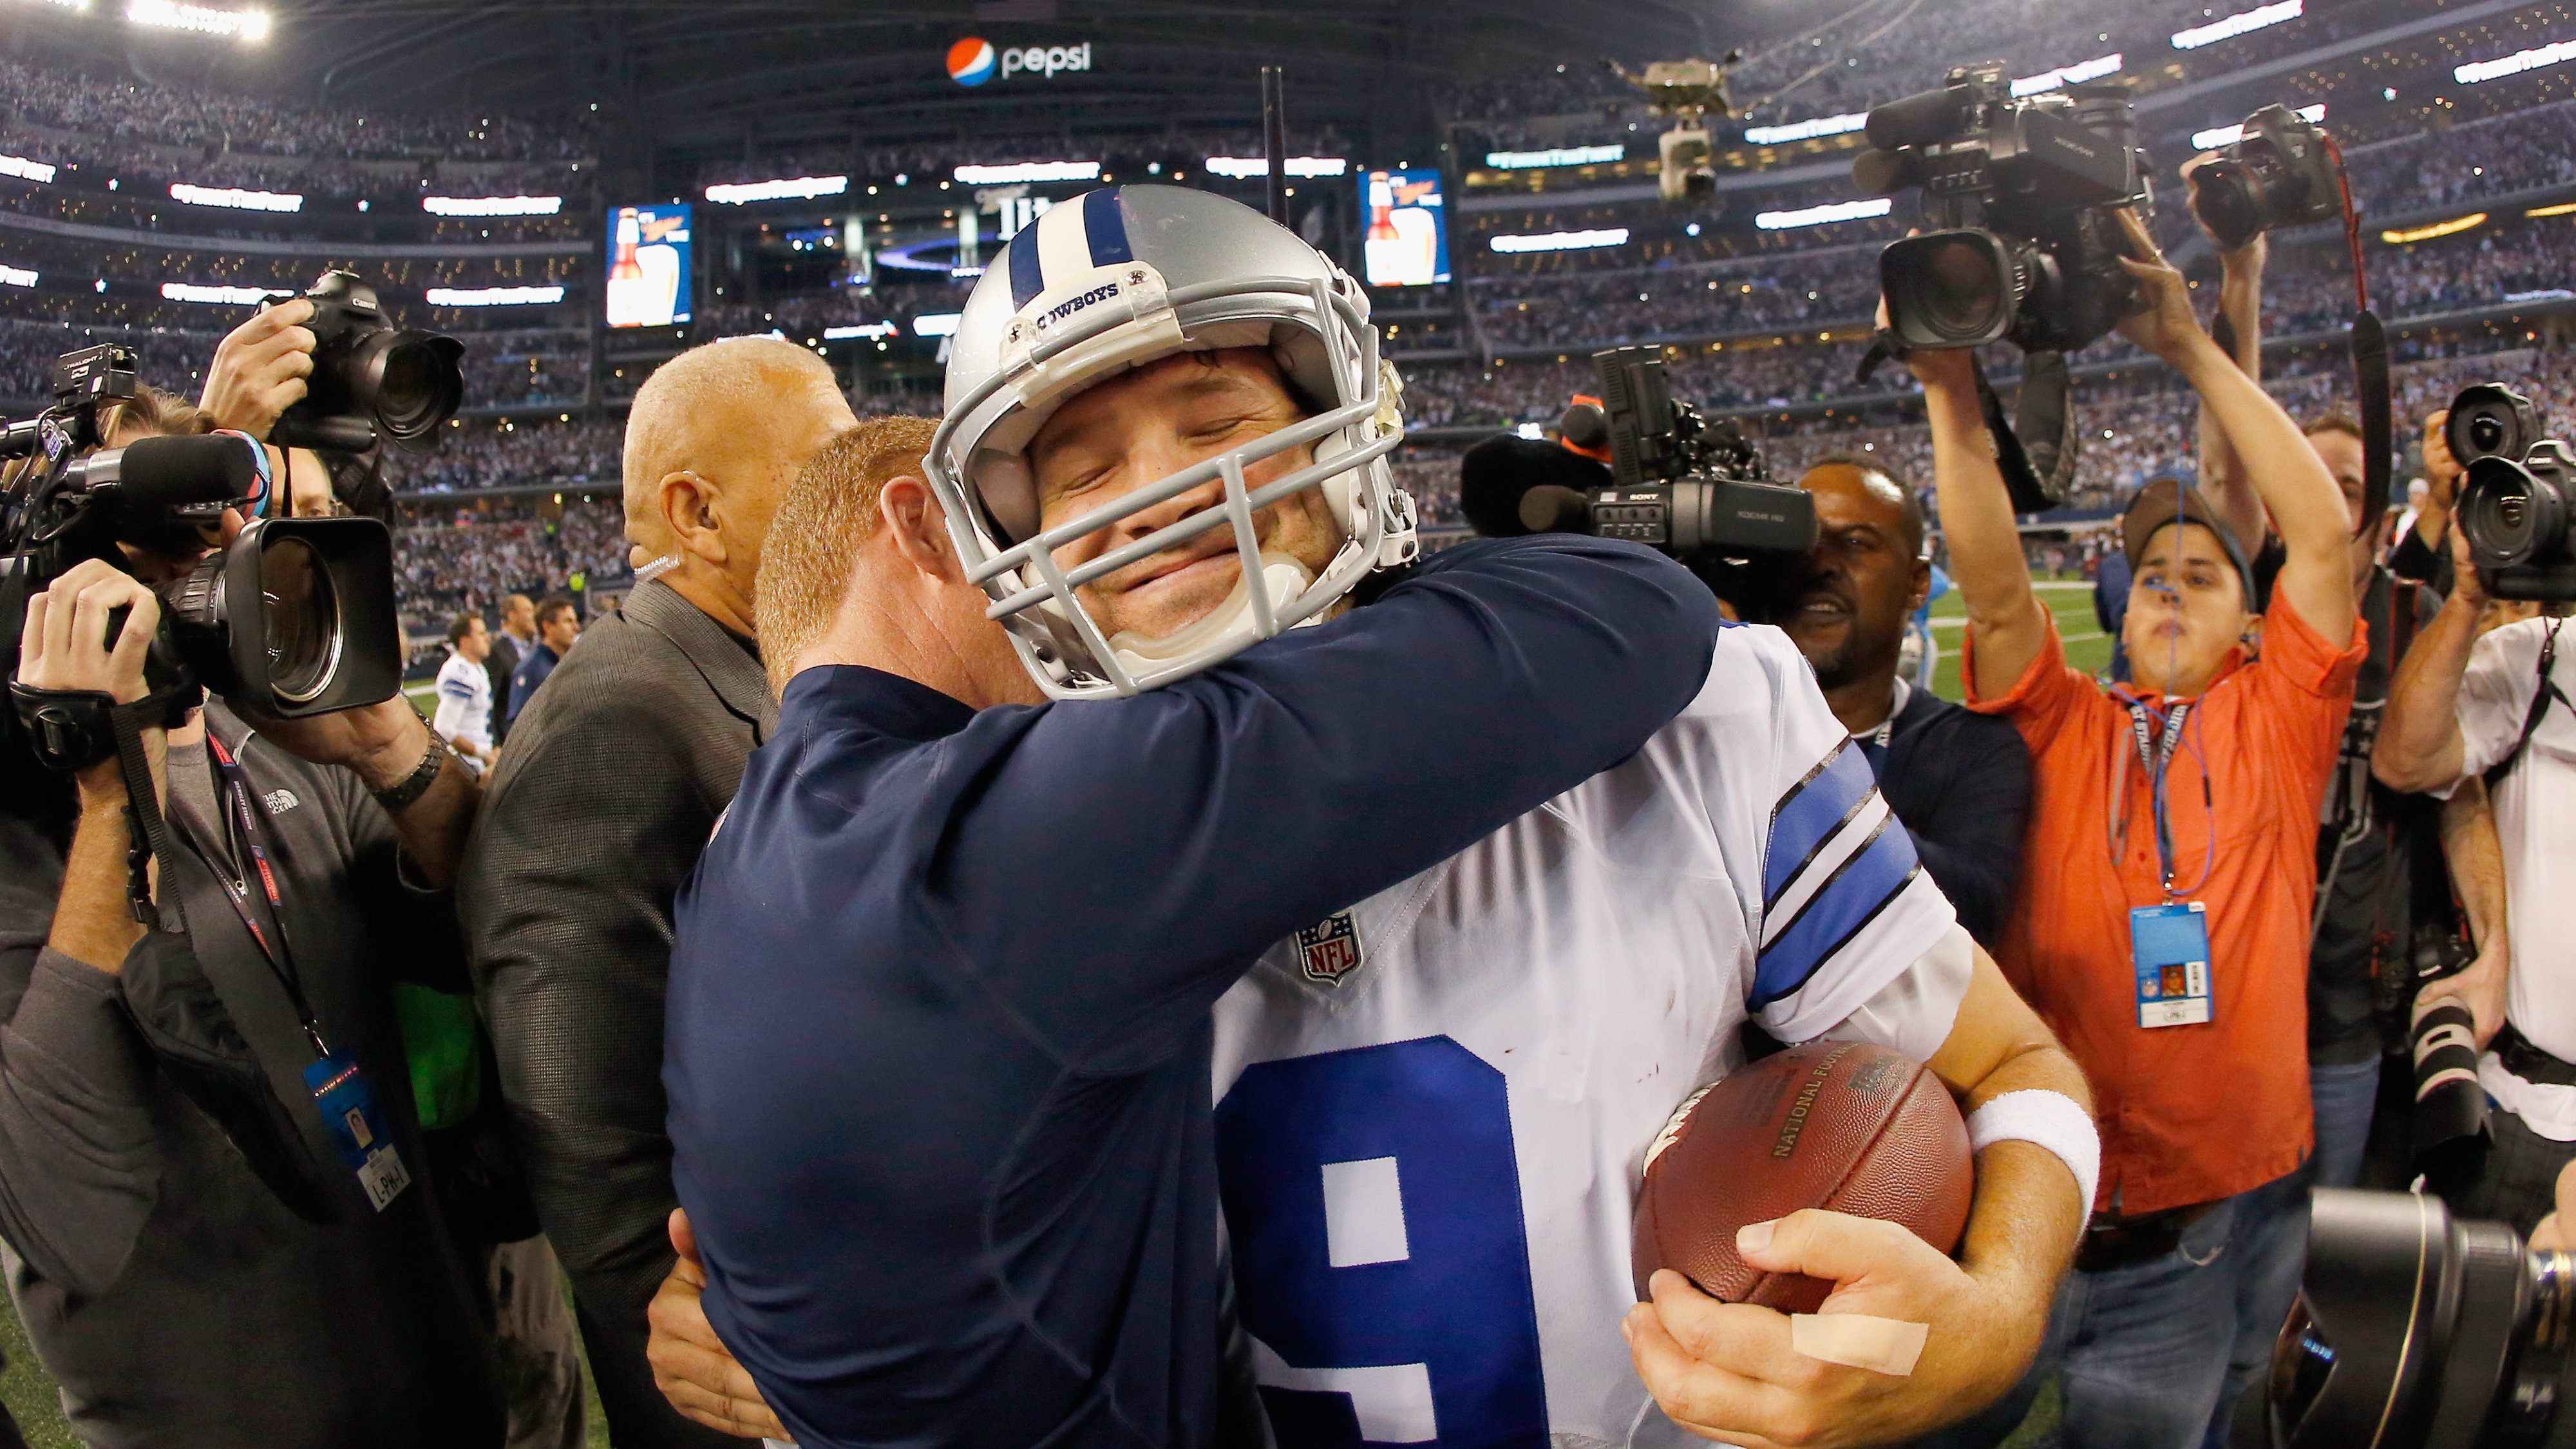 ARLINGTON, TX - JANUARY 04: Quarterback Tony Romo #9 of the Dallas Cowboys celebrates with head coach Jason Garrett of the Dallas Cowboys after the Cowboys beat the Detroit Lions 24-20 during a NFC Wild Card Playoff game at AT&T Stadium on January 4, 2015 in Arlington, Texas. (Photo by Tom Pennington/Getty Images)